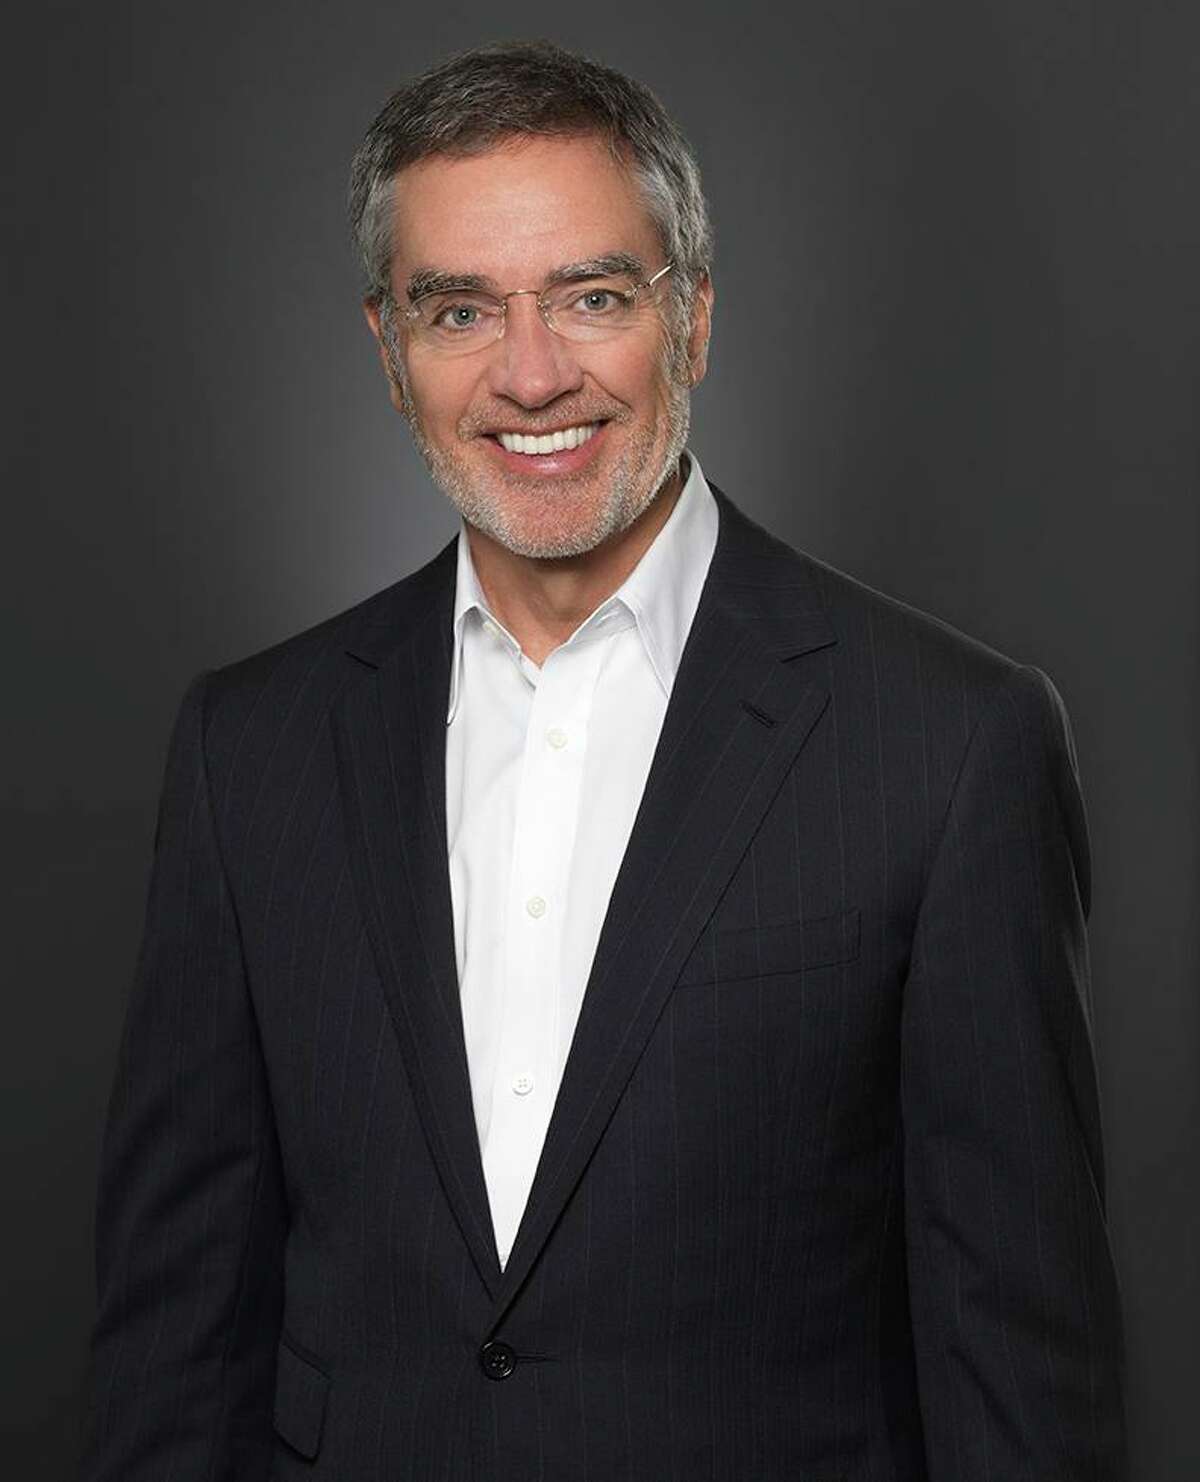 Bob Pittman, CEO of San Antonio’s iHeartMedia Inc., collected $22.9 million in total compensation last year, according to SEC filings — 408 times the median earnings of iHeart employees.